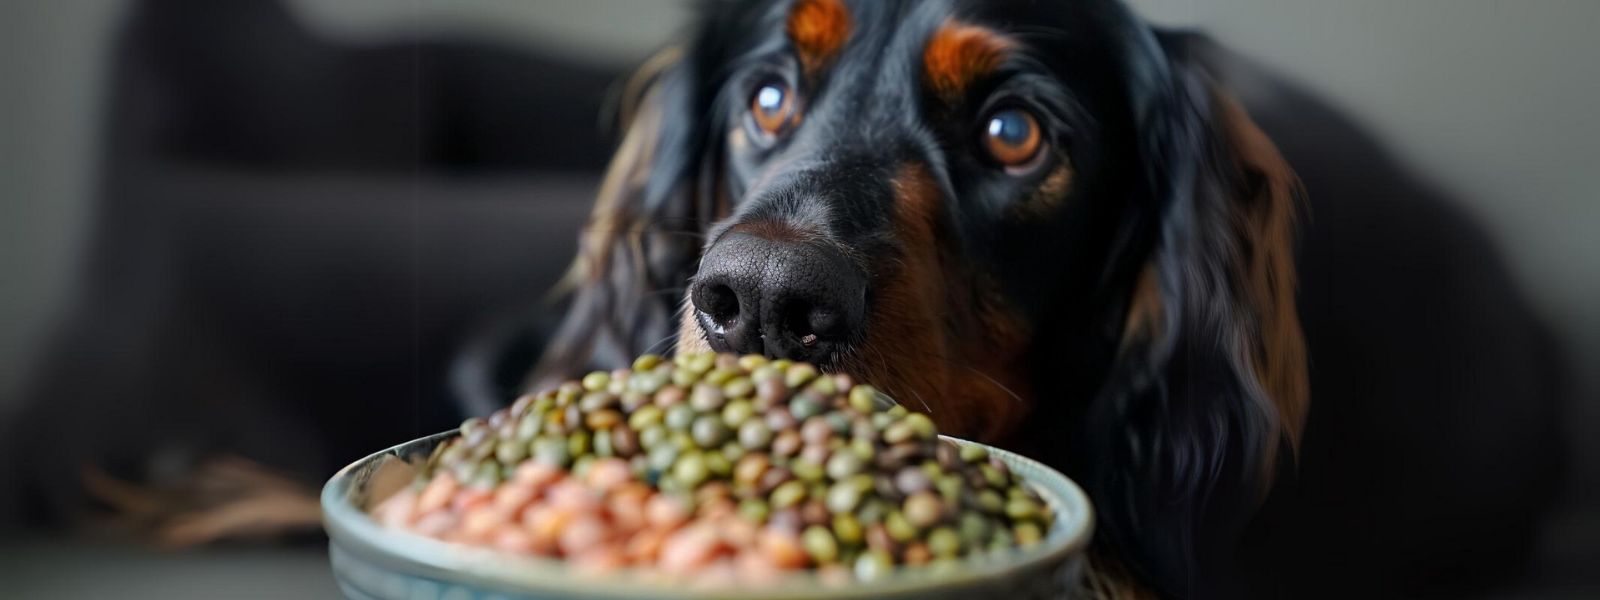 Can Dogs Eat Lentils? You Might Be Surprised.